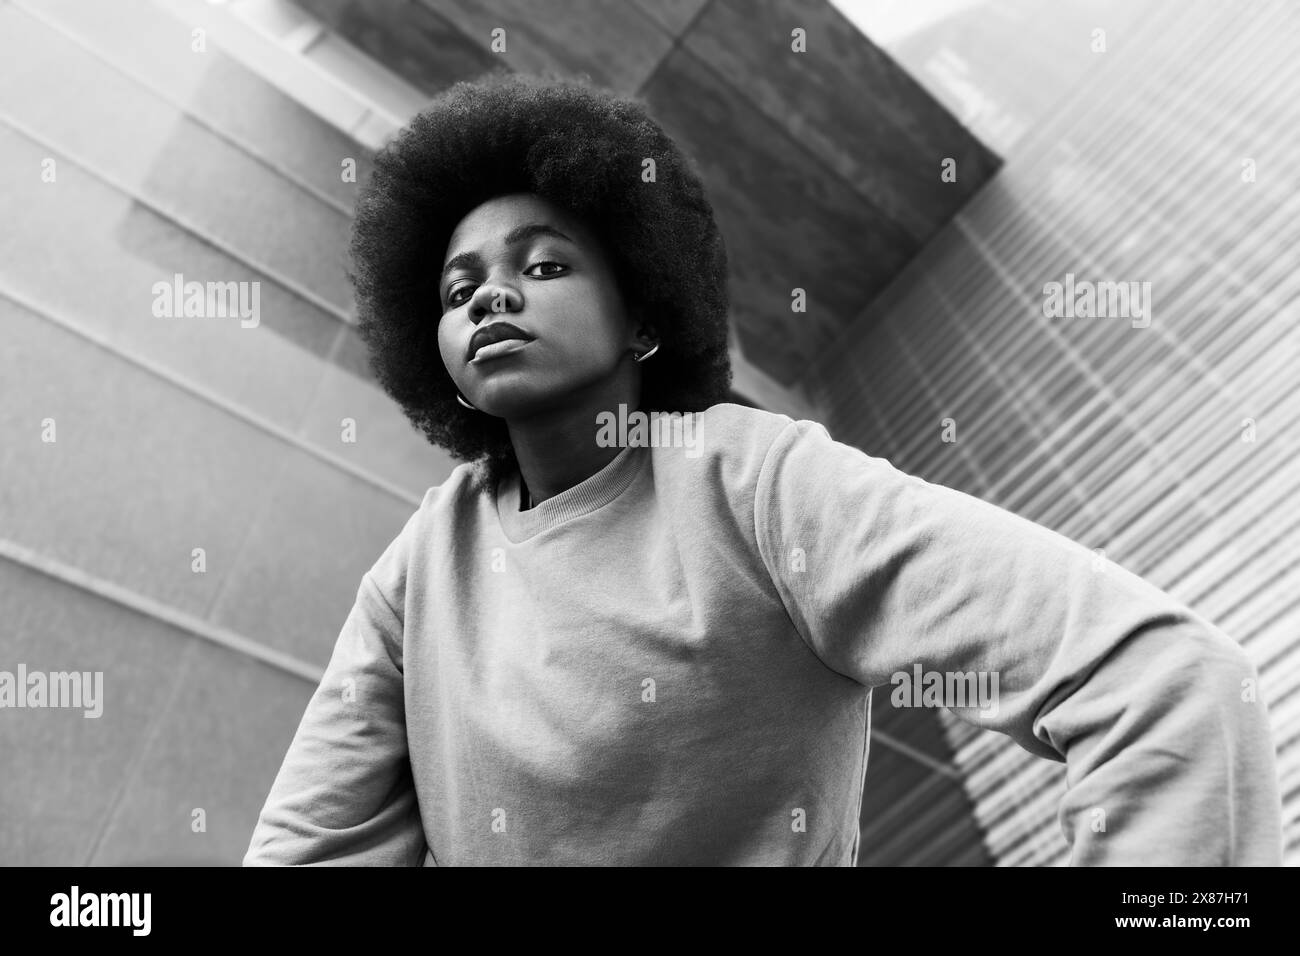 Confident young woman with Afro hairstyle near building Stock Photo